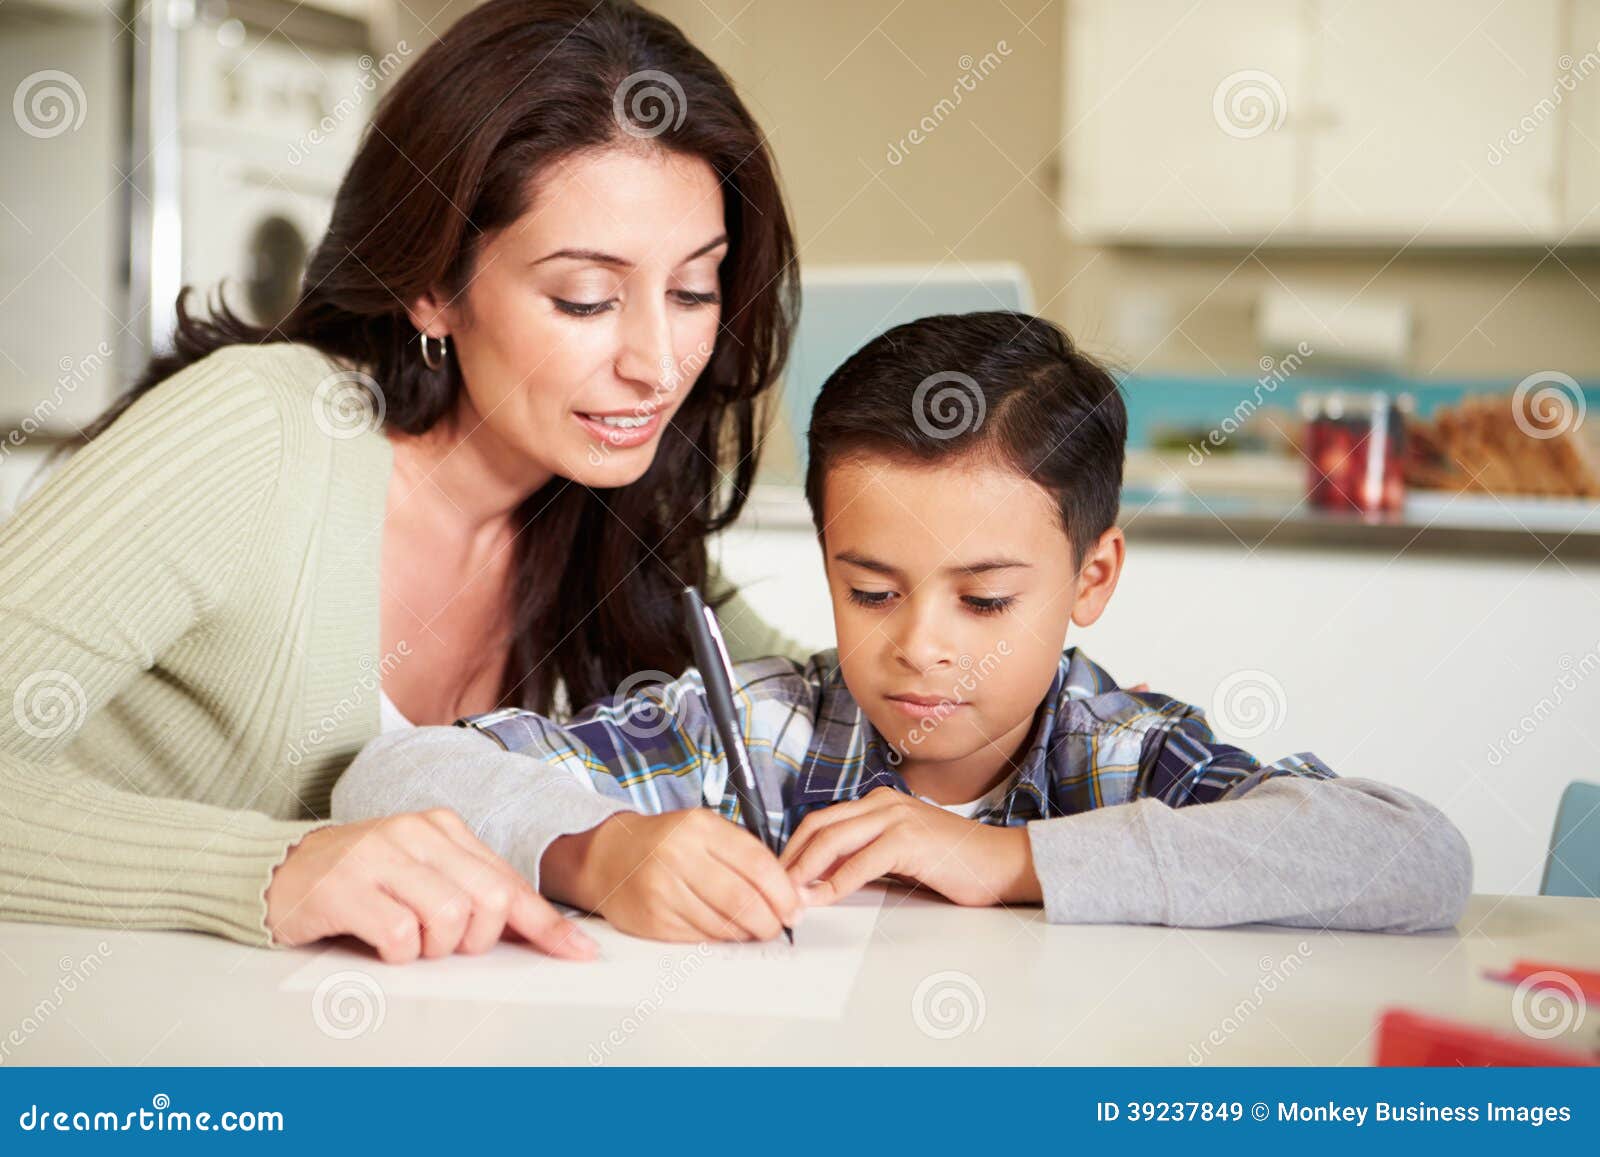 Hispanic Mother Helping Son With Homework At Table Stock Photo I